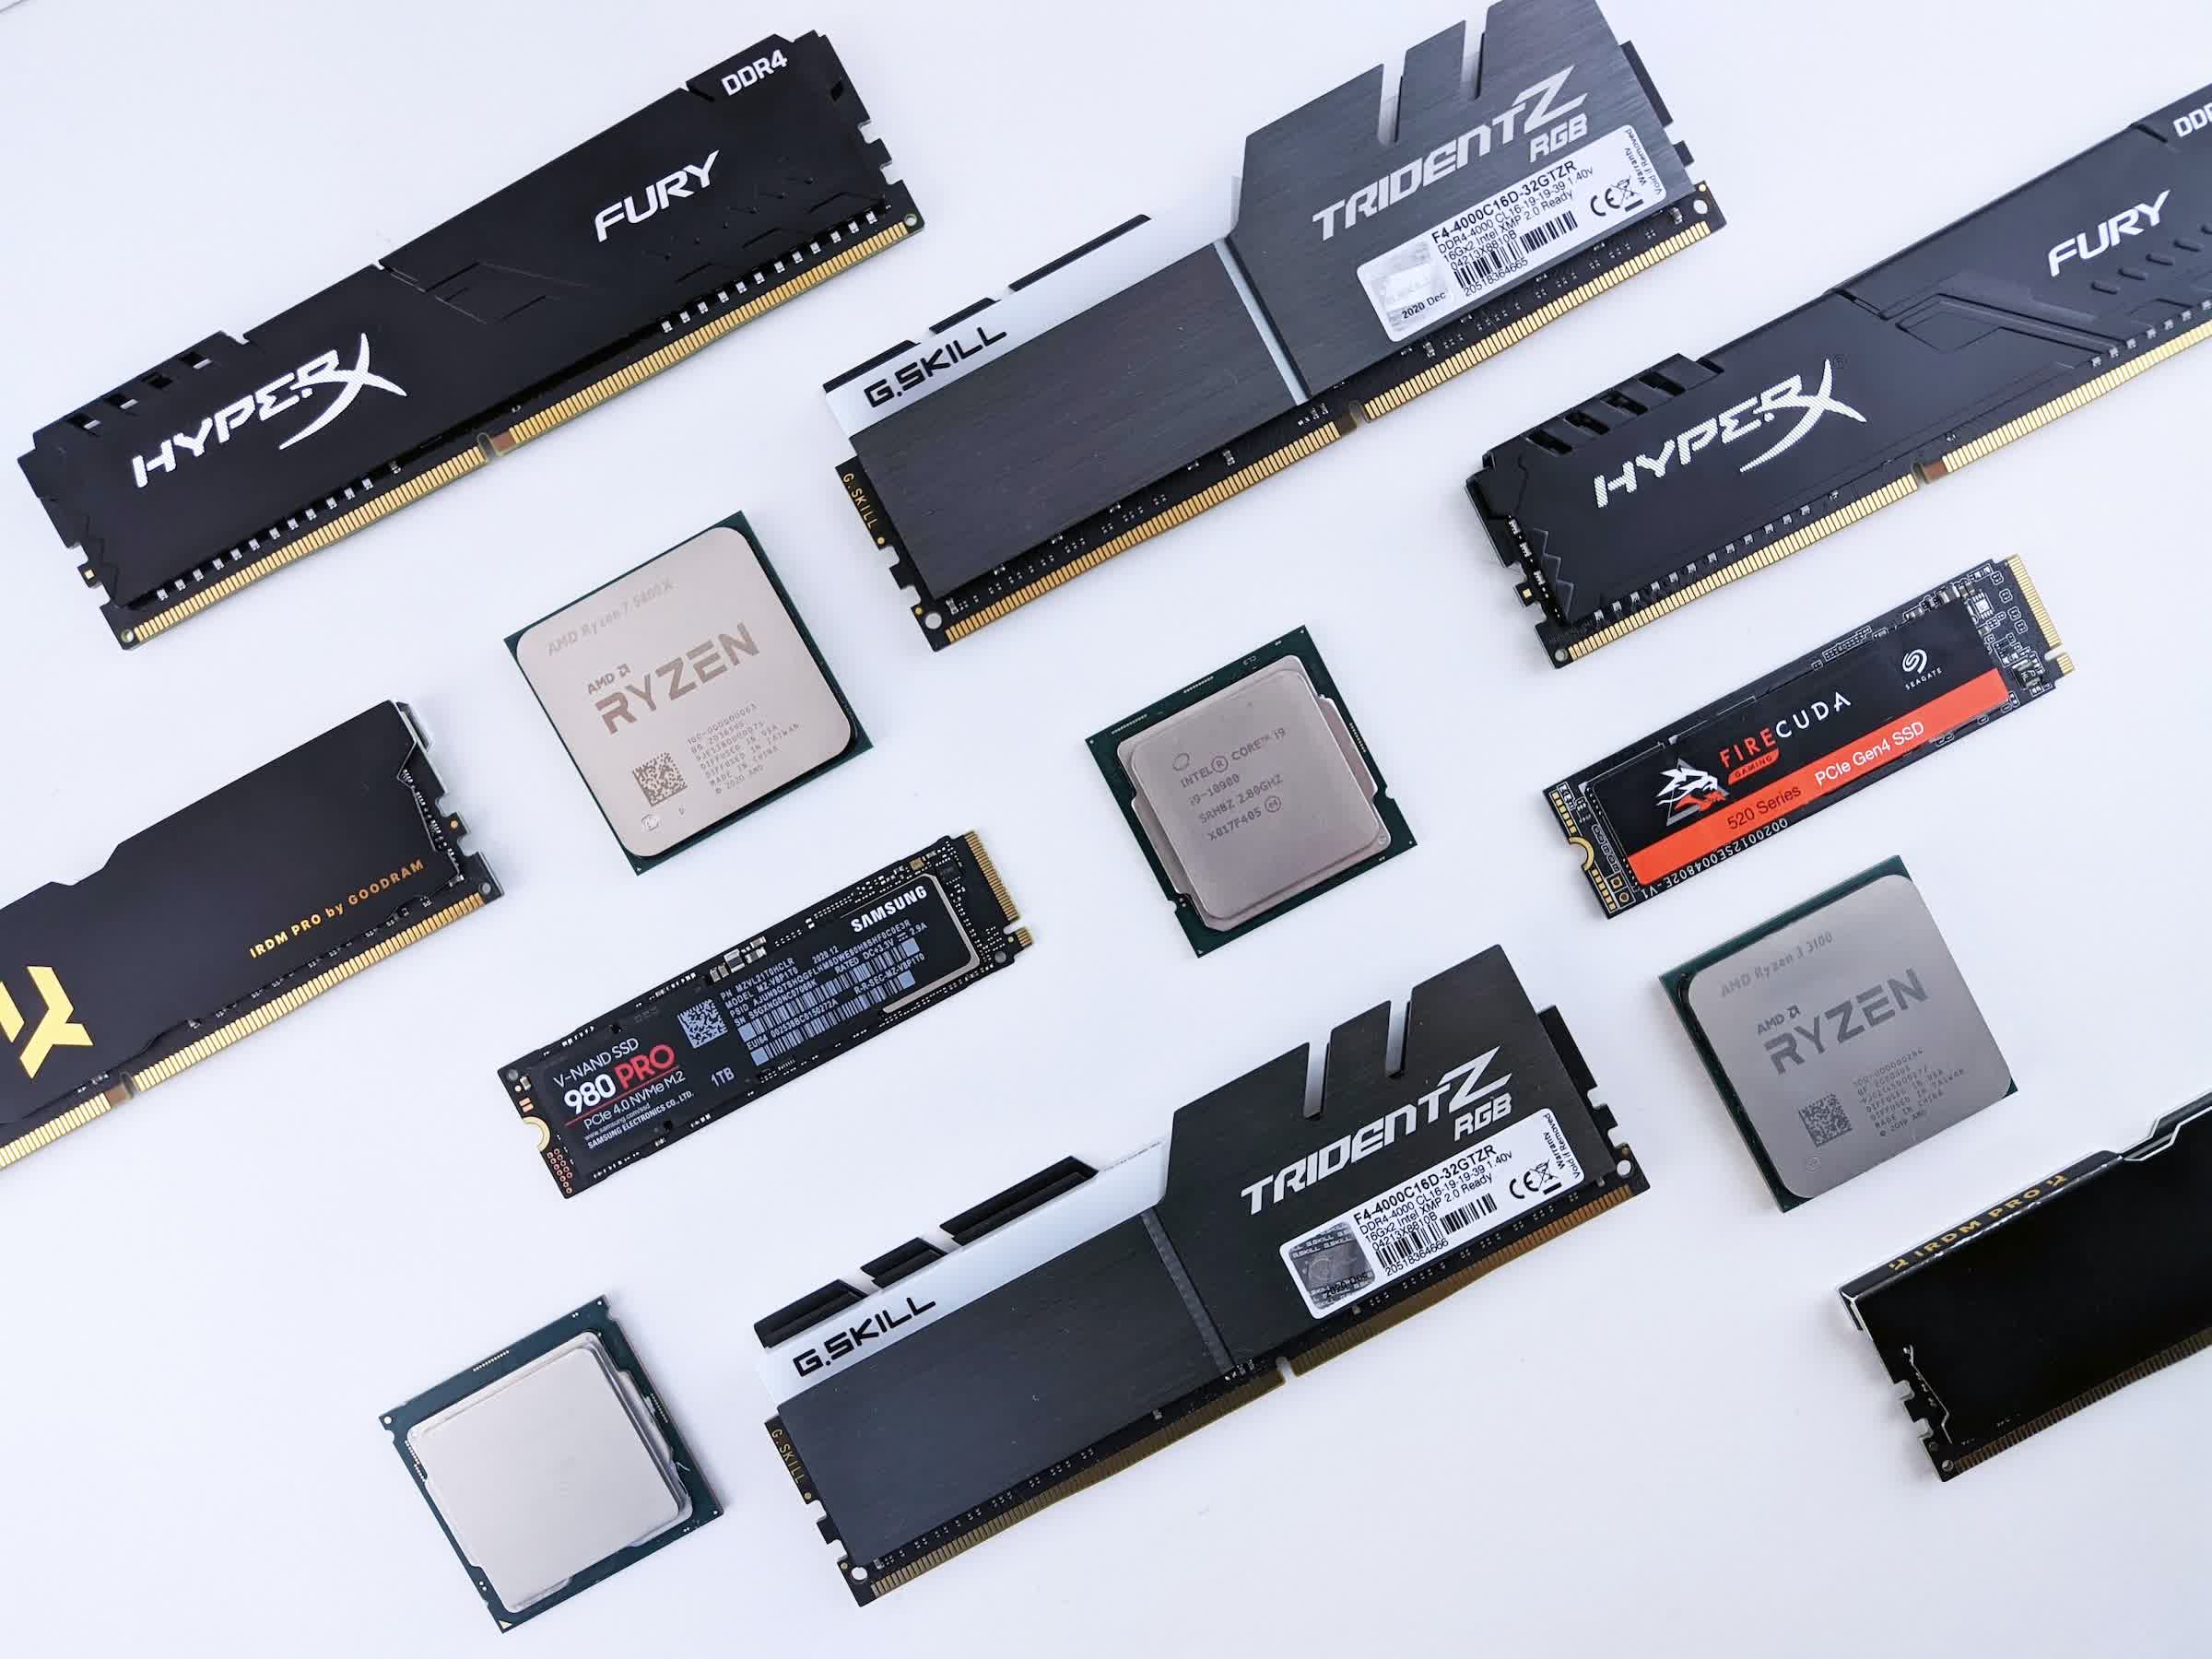 DRAM and SSDs will continue to get cheaper in the coming months